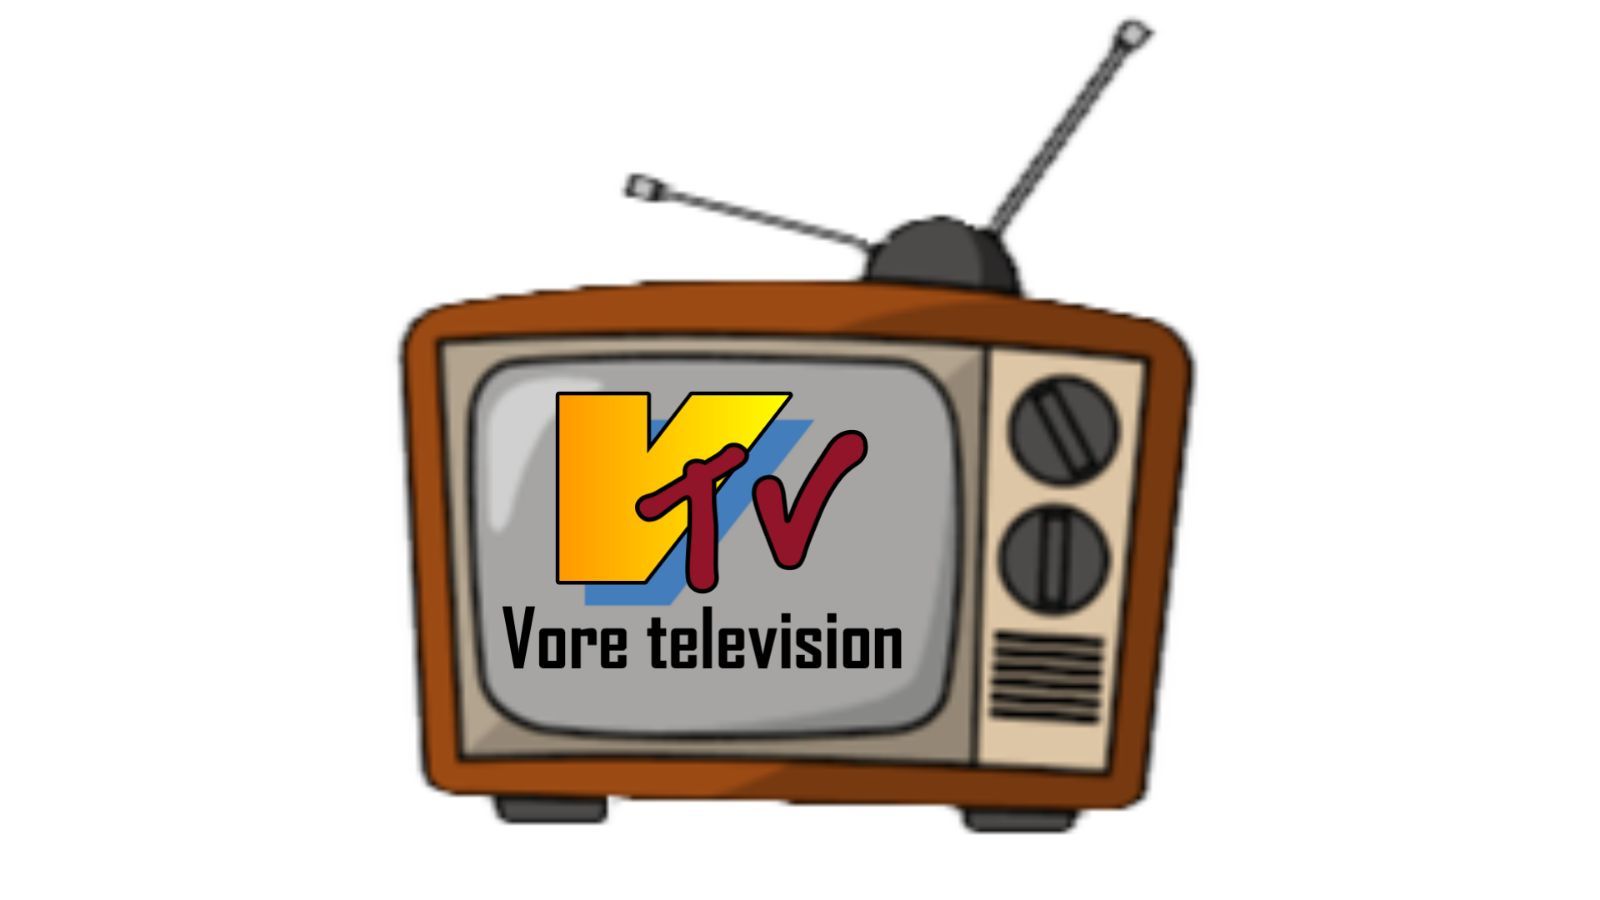 Introducing Our New Voretv We Have Newscomedy And Regular Entertainment Plus Way More To Come